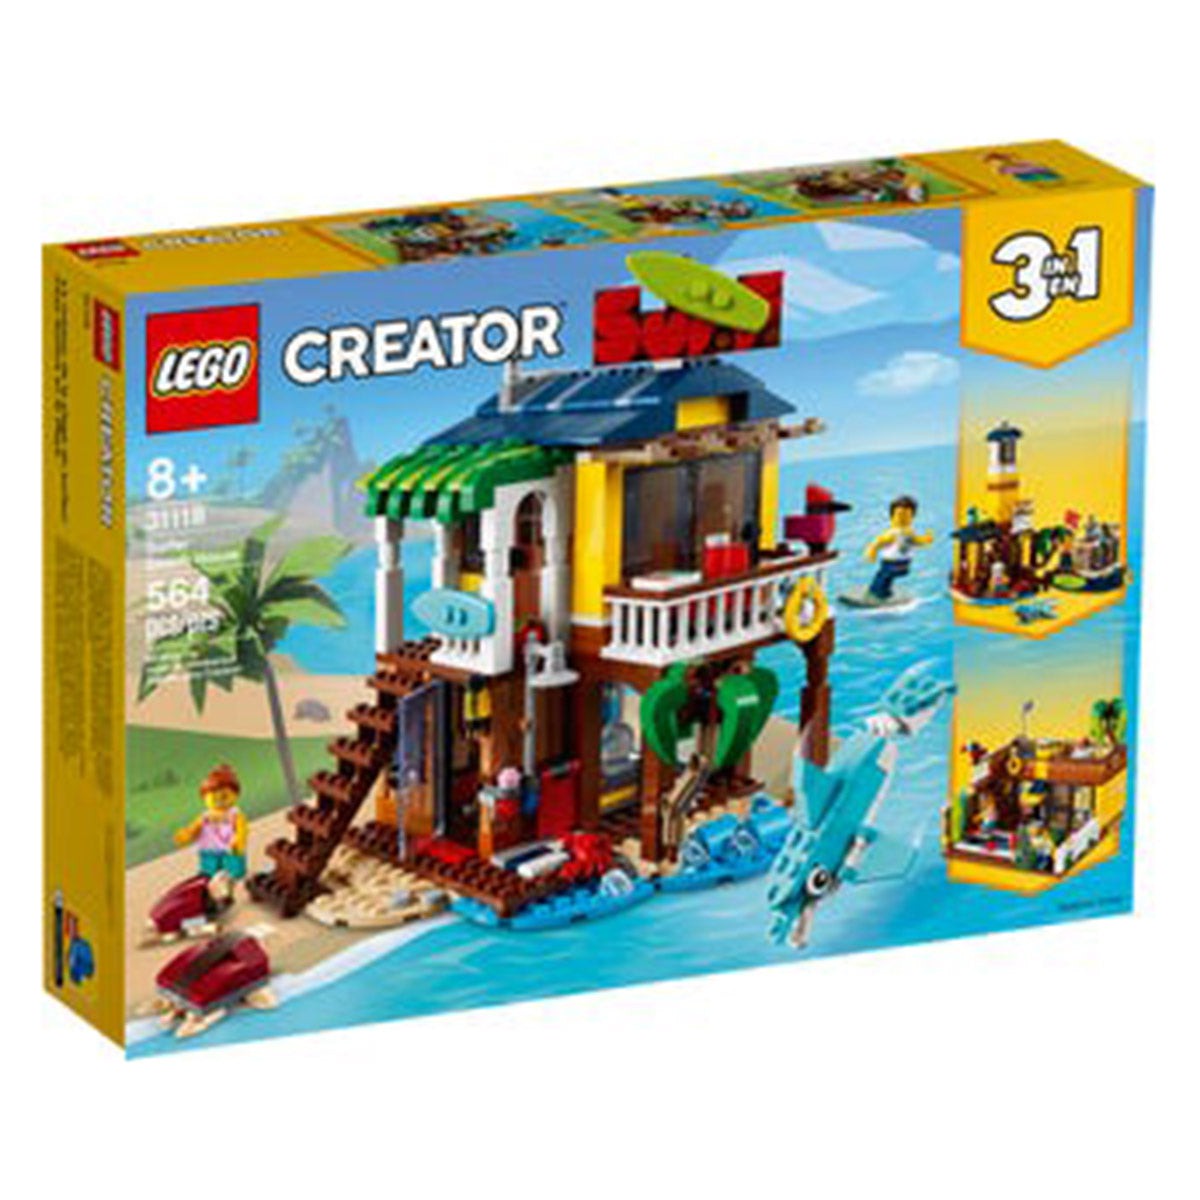 LEGO JOUET K.I.D. INC Toys & Games LEGO Creator 3-in-1 Surfer Beach House, 31118, Ages 8+, 564 Pieces 673419336659